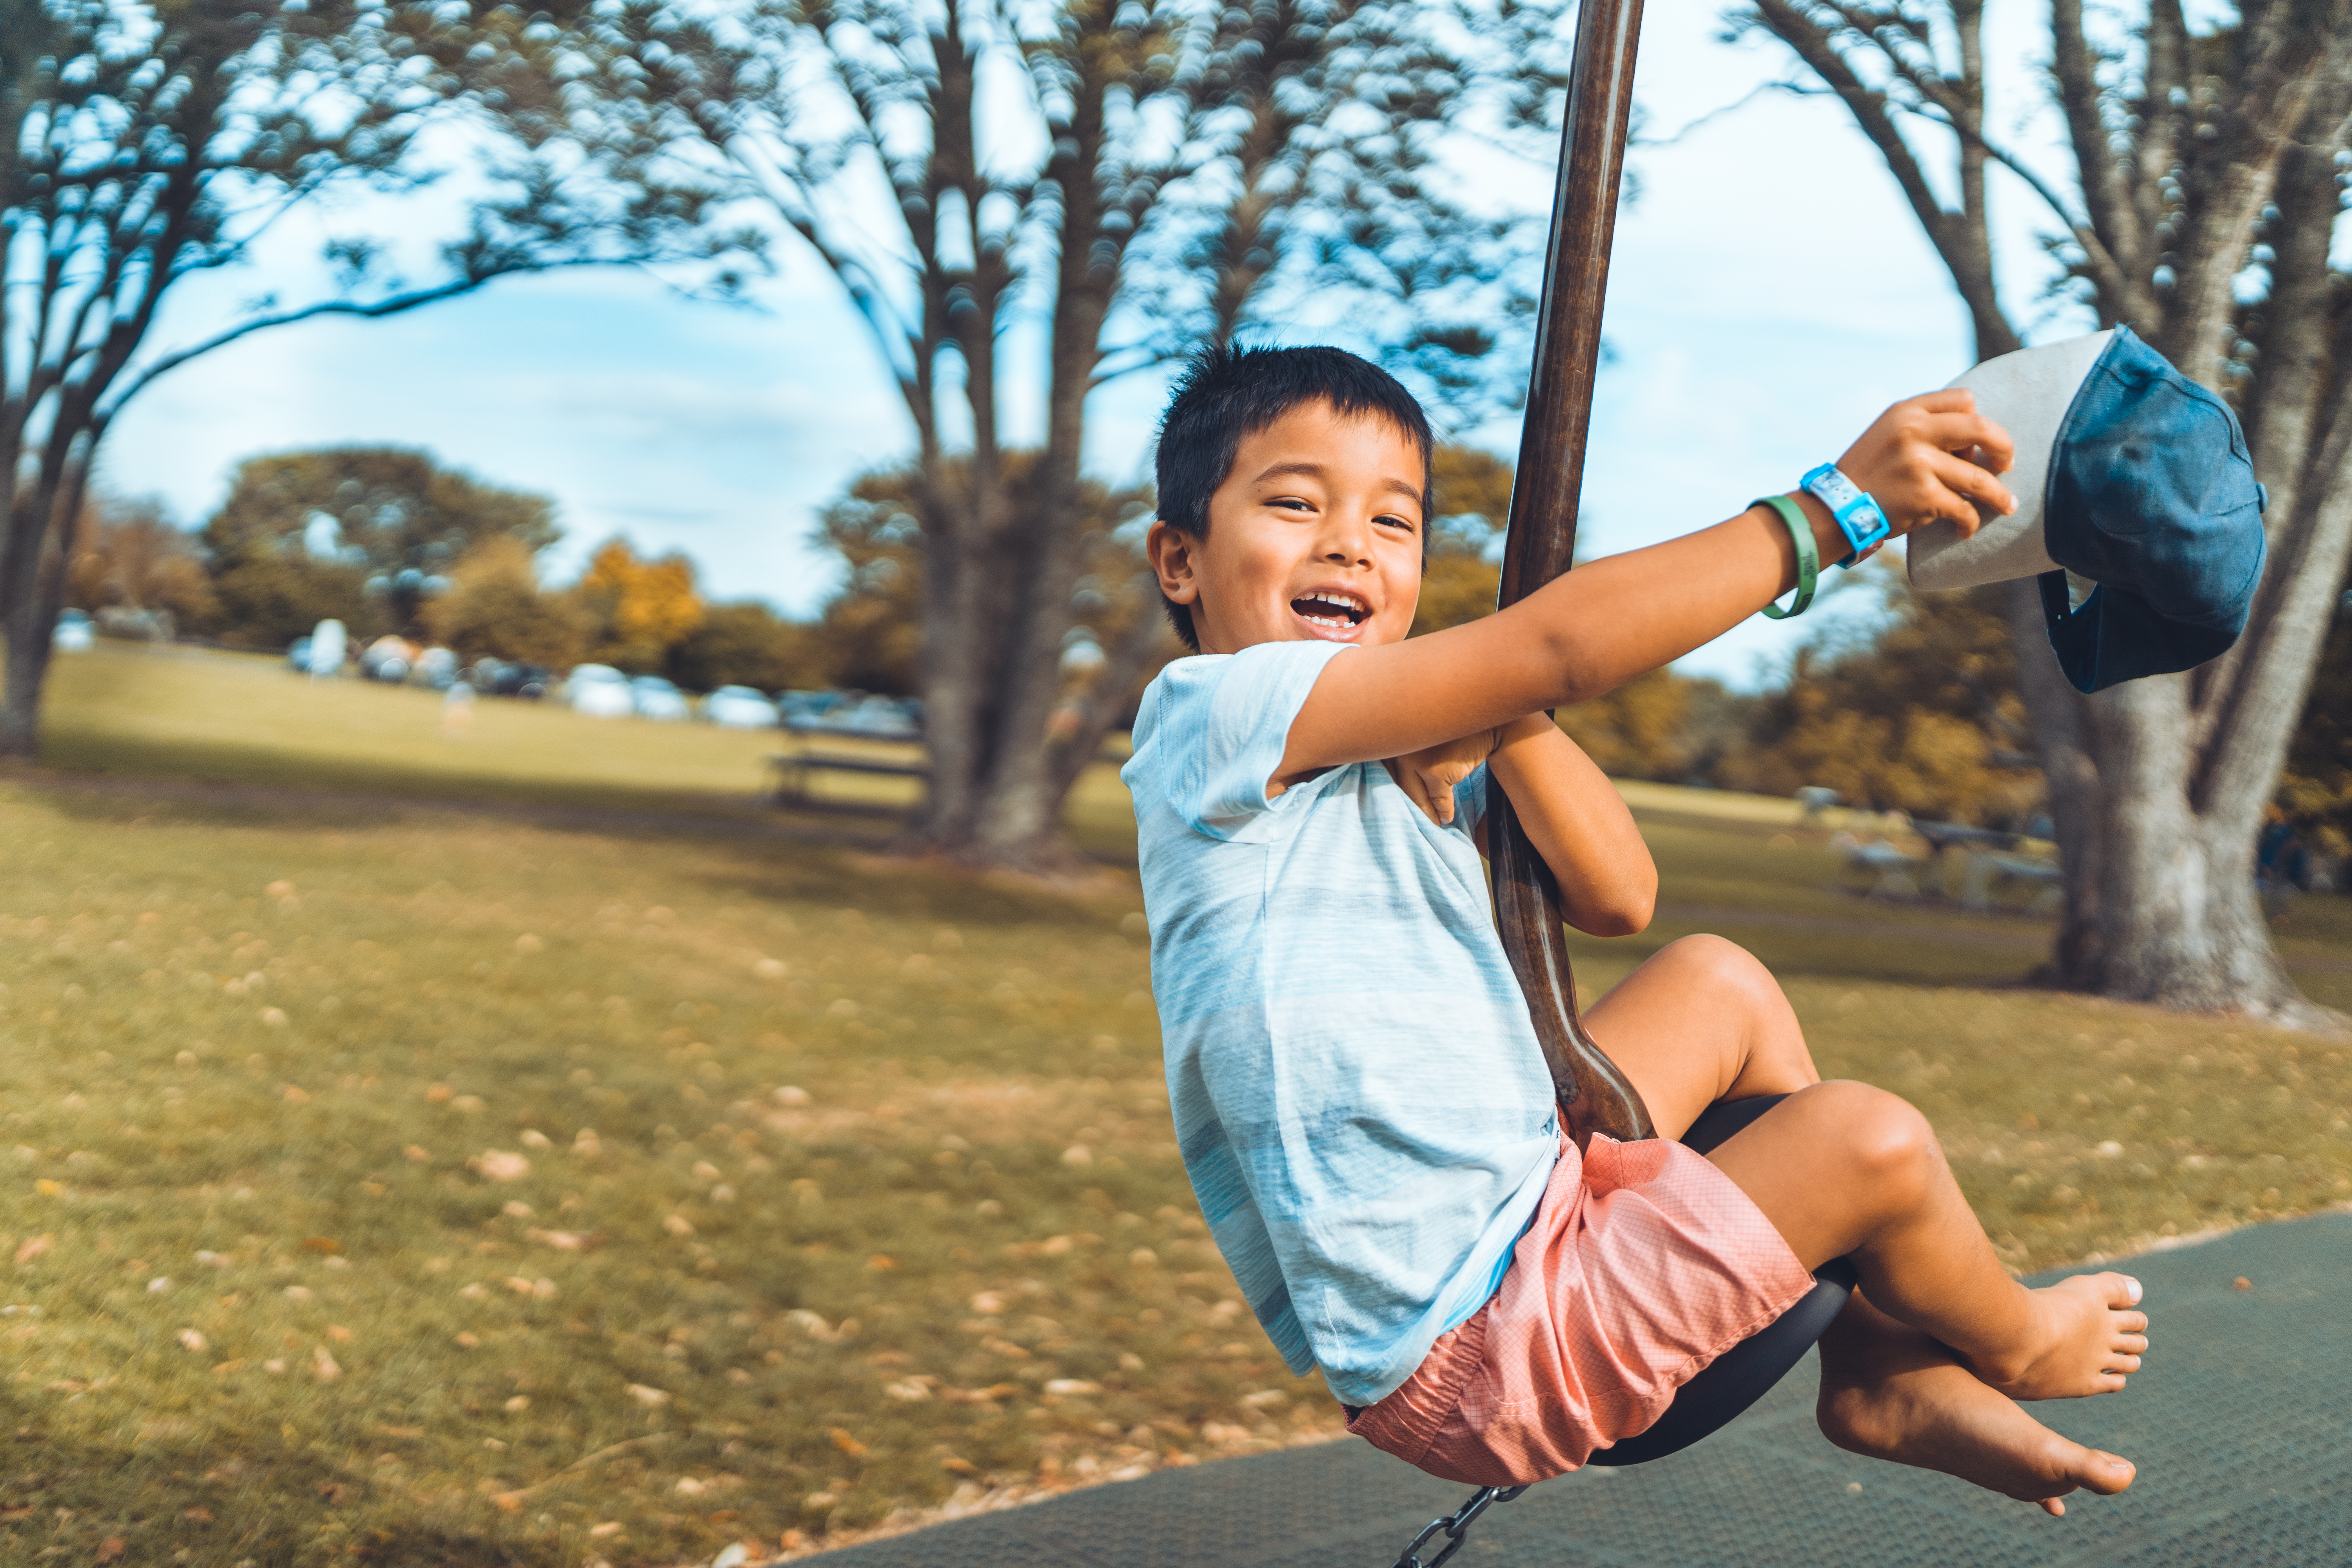 young boy on swing